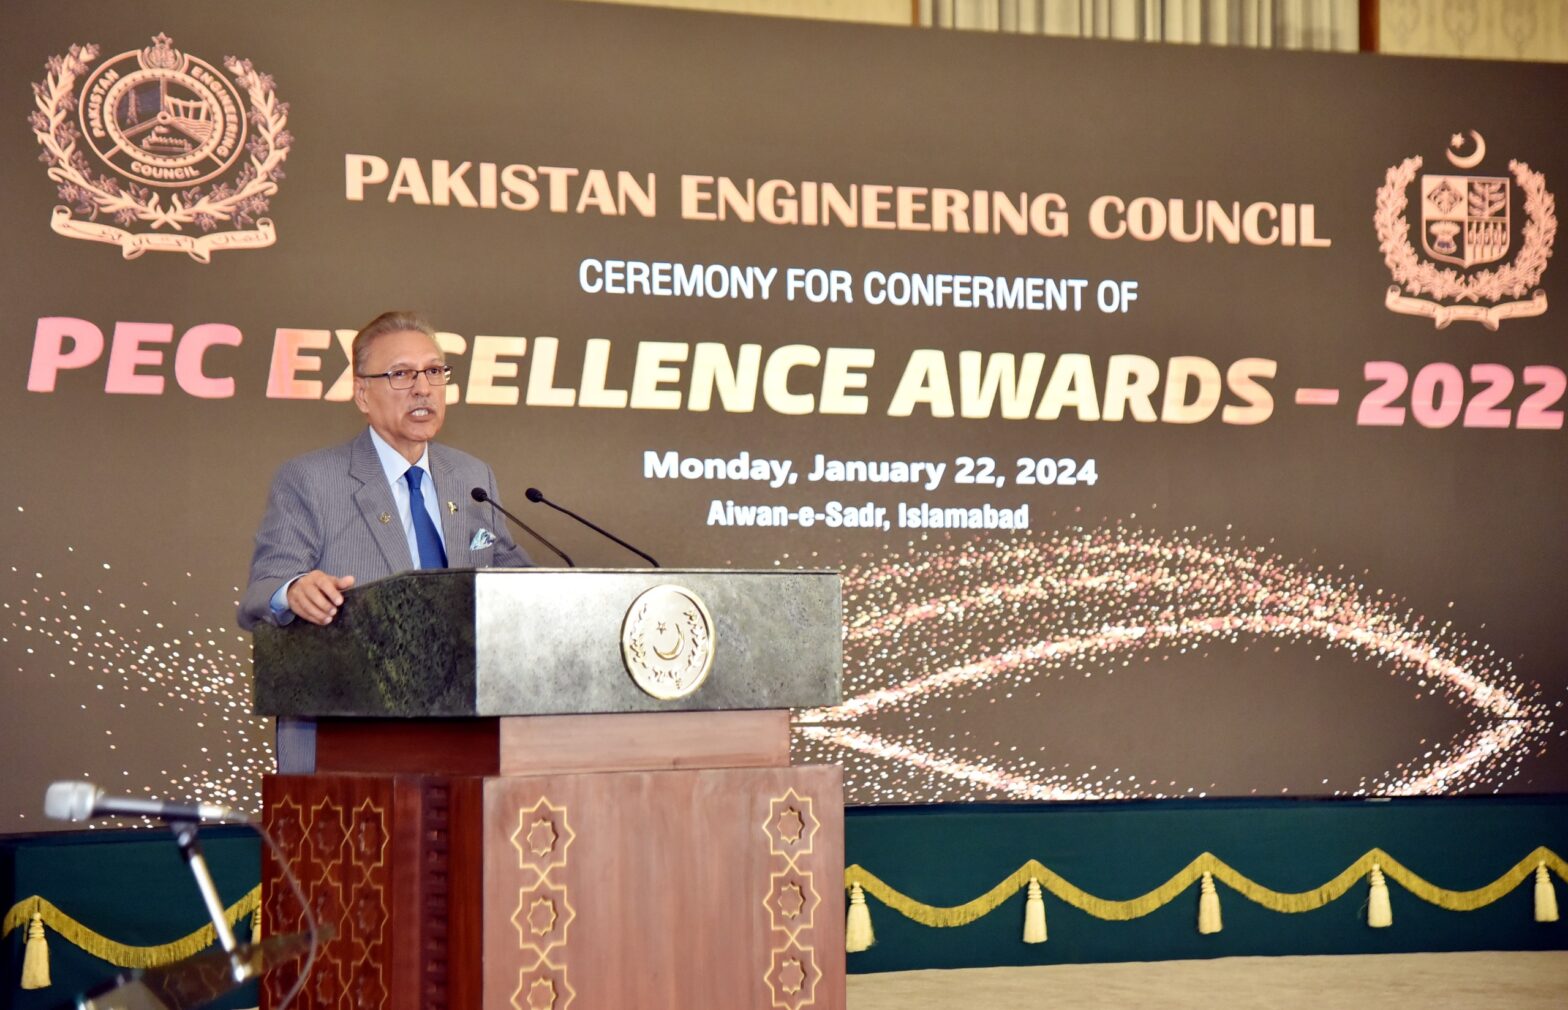 Engineers playing key role in country's development: President